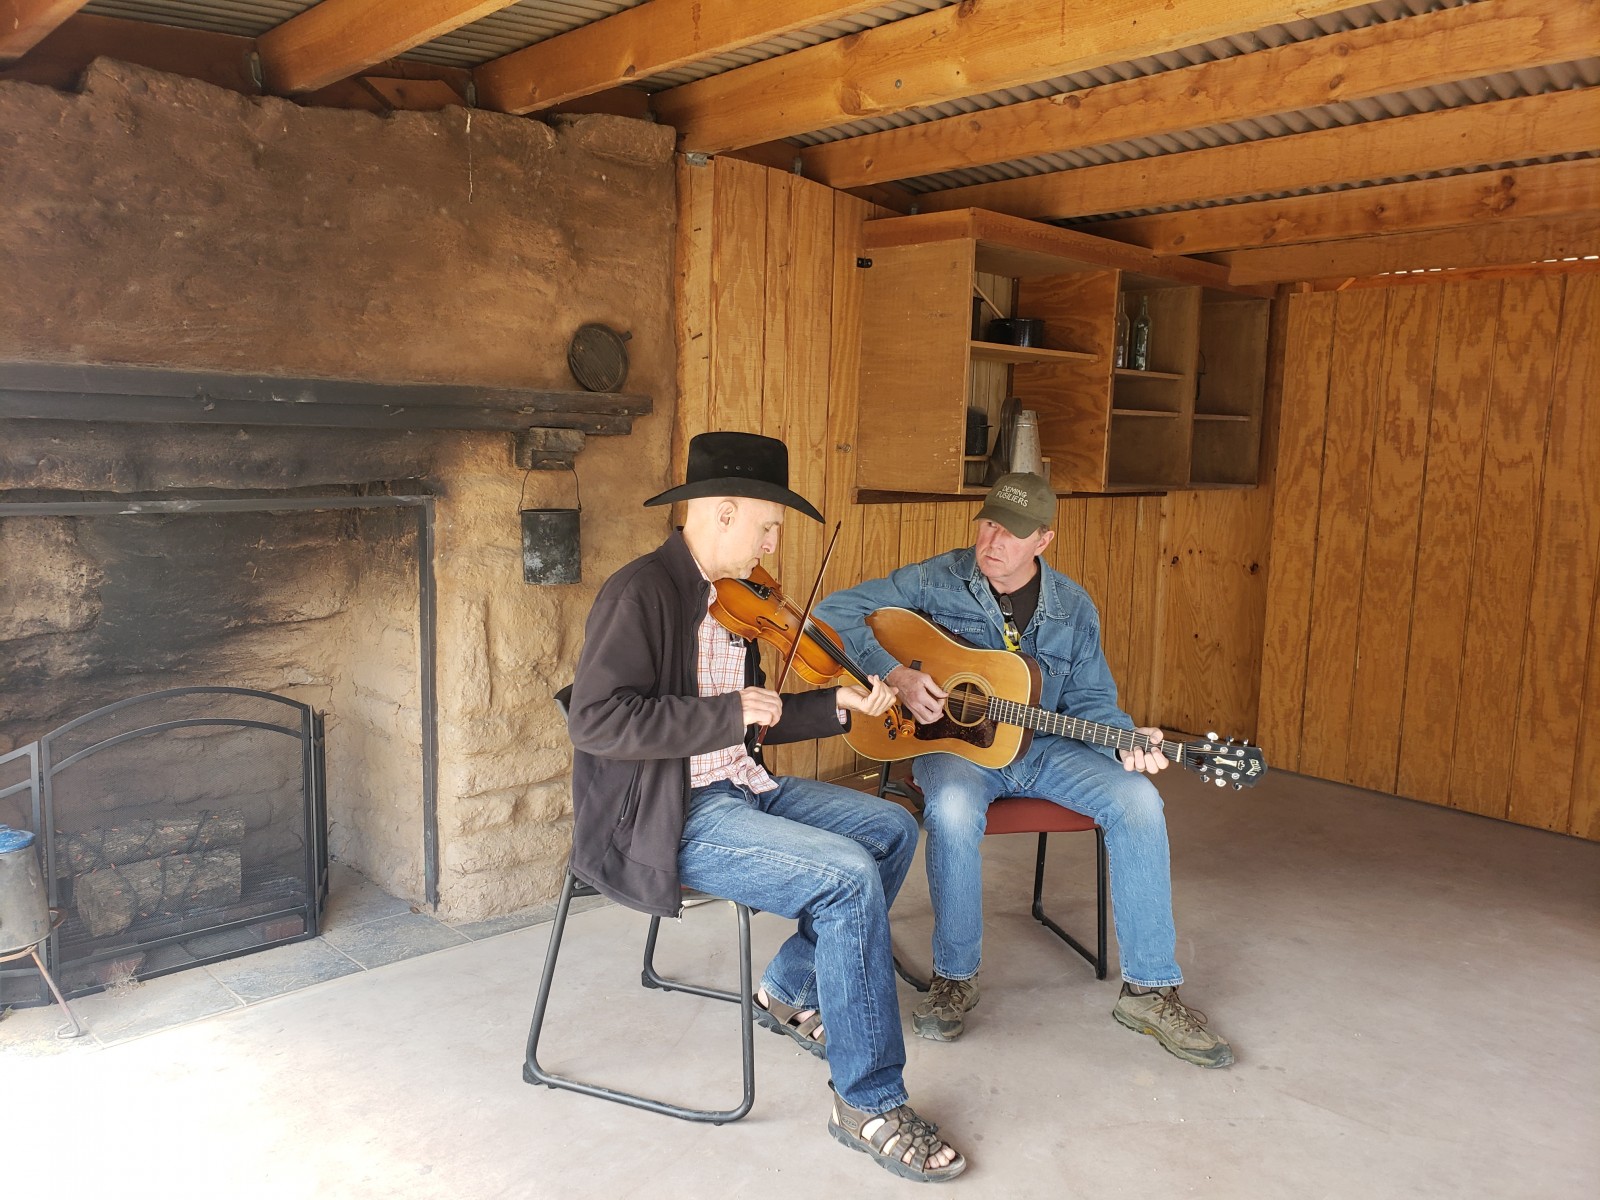 The Deming Fusilliers perform during a special event at Fort Selden Historic Site.